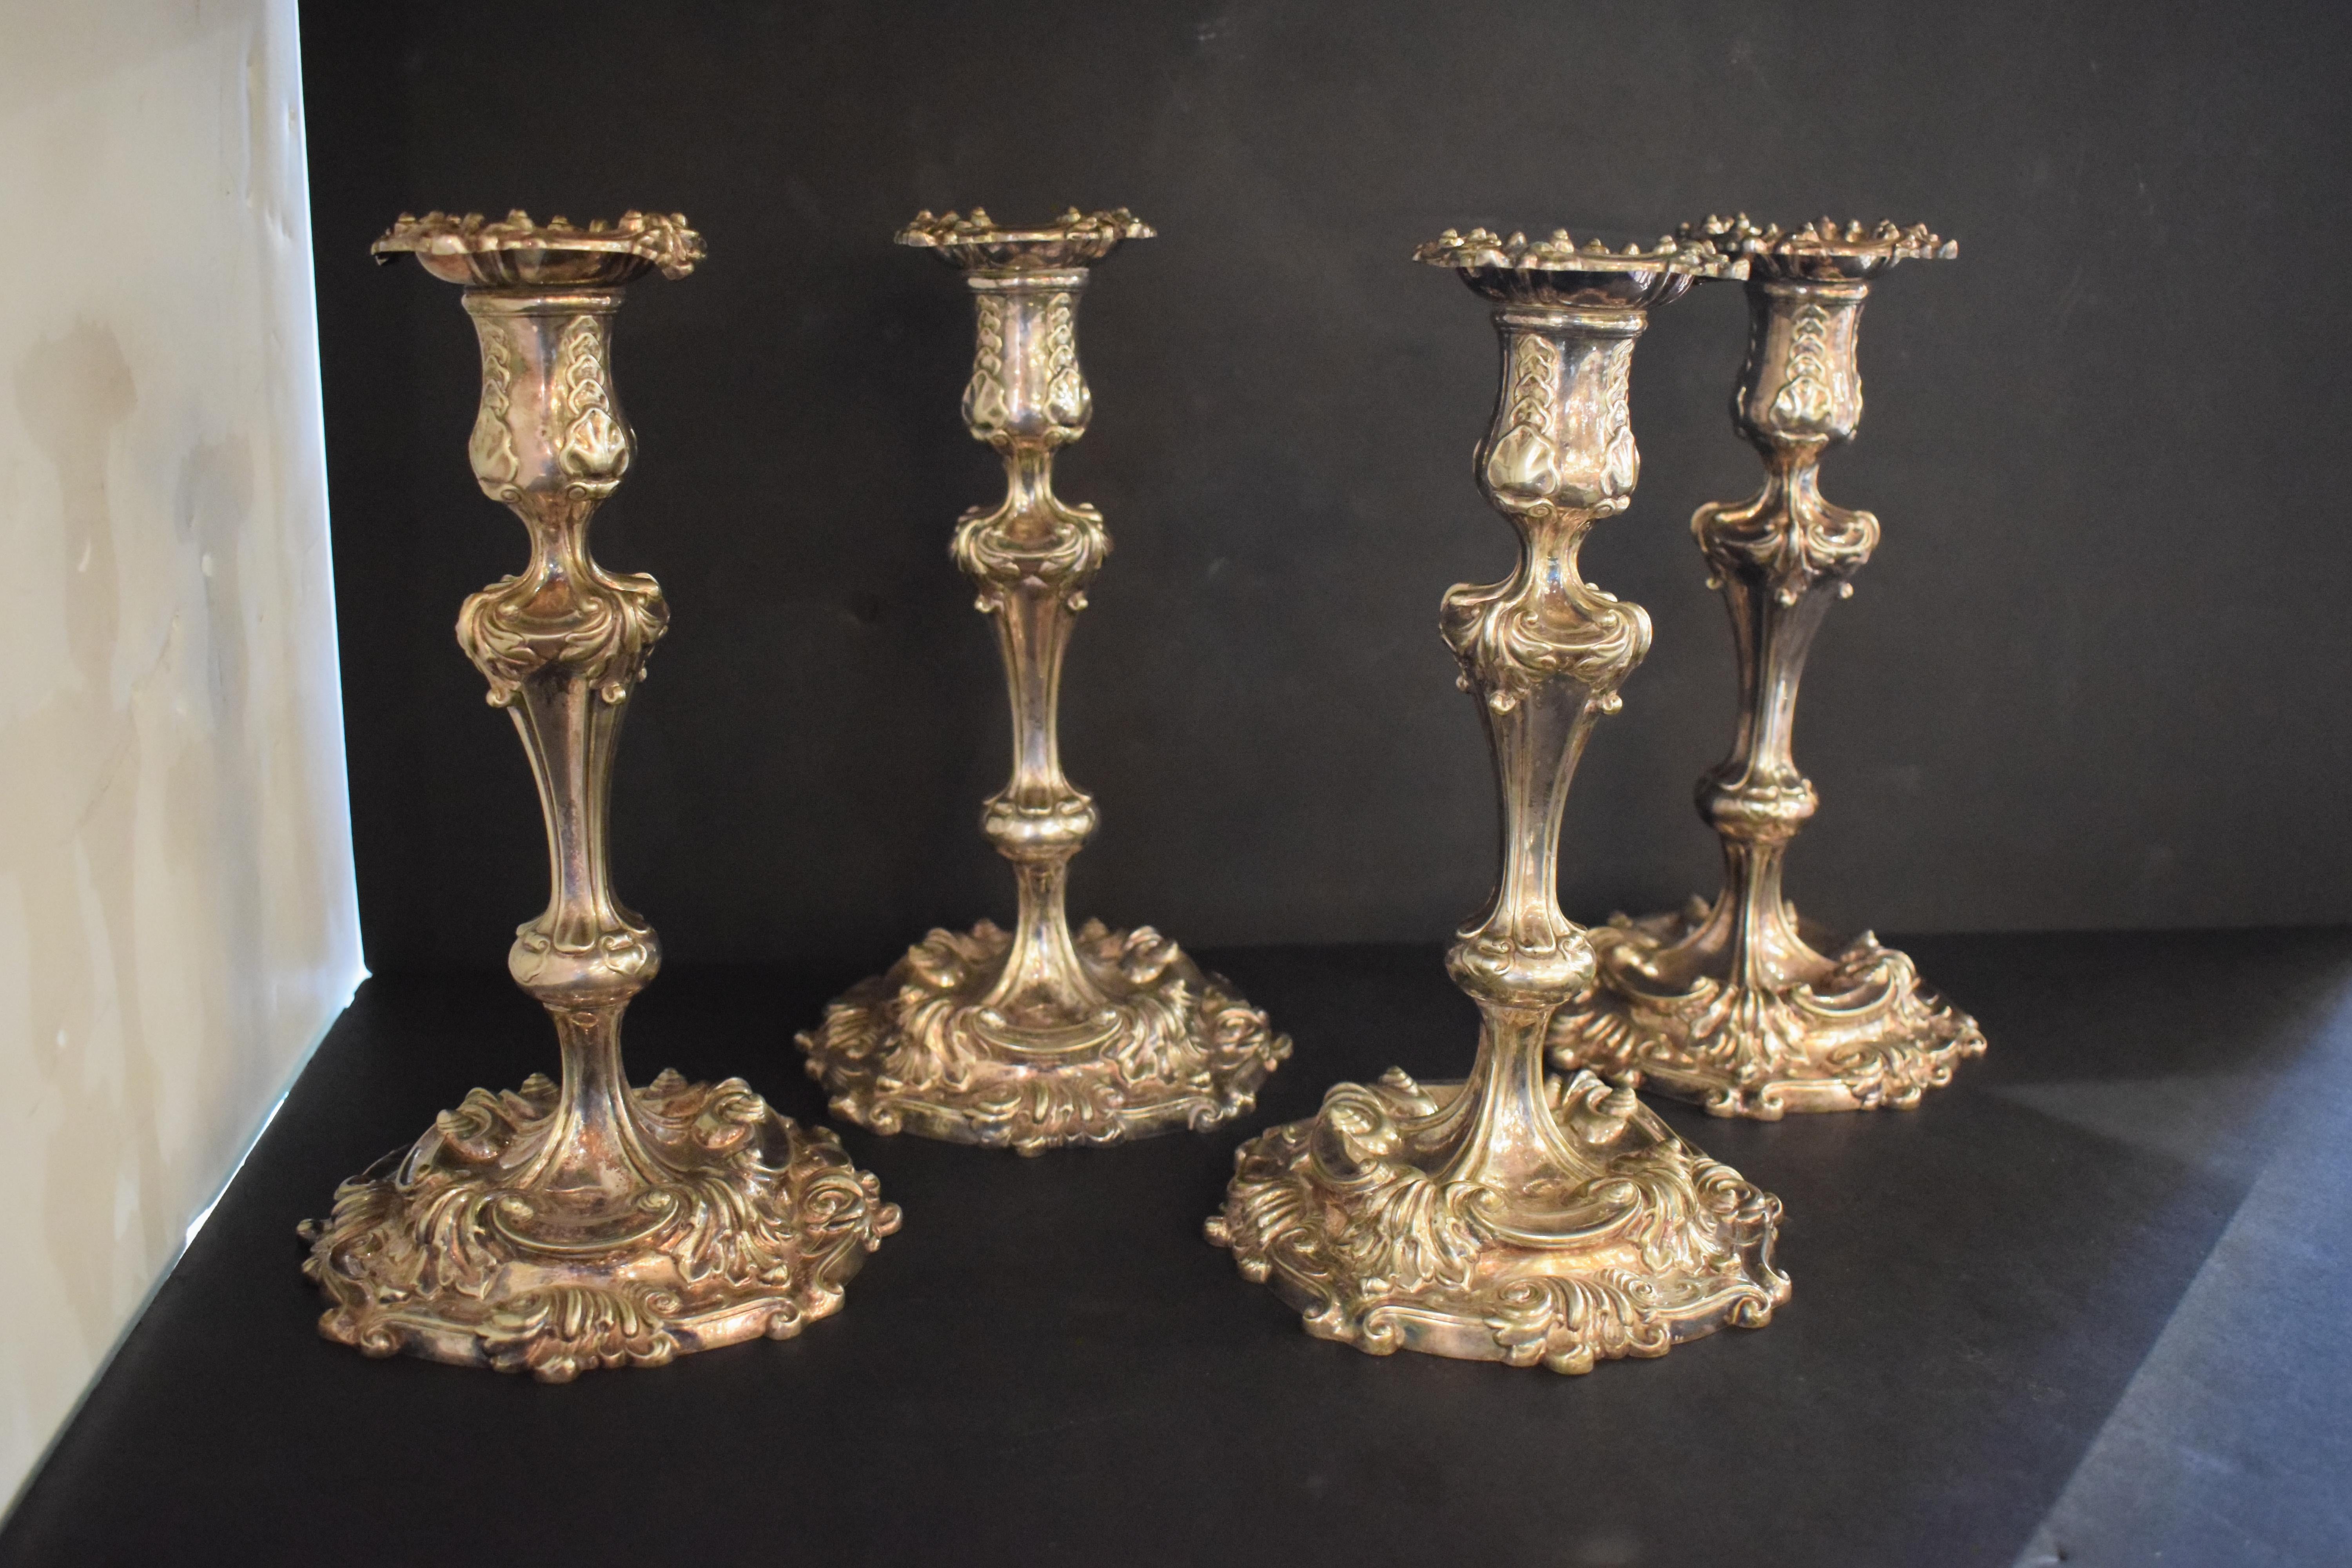 A Fine Set of 4 Candlesticks in the Rococo taste by Tiffany & Co. 3 of them stamped in the bottom 